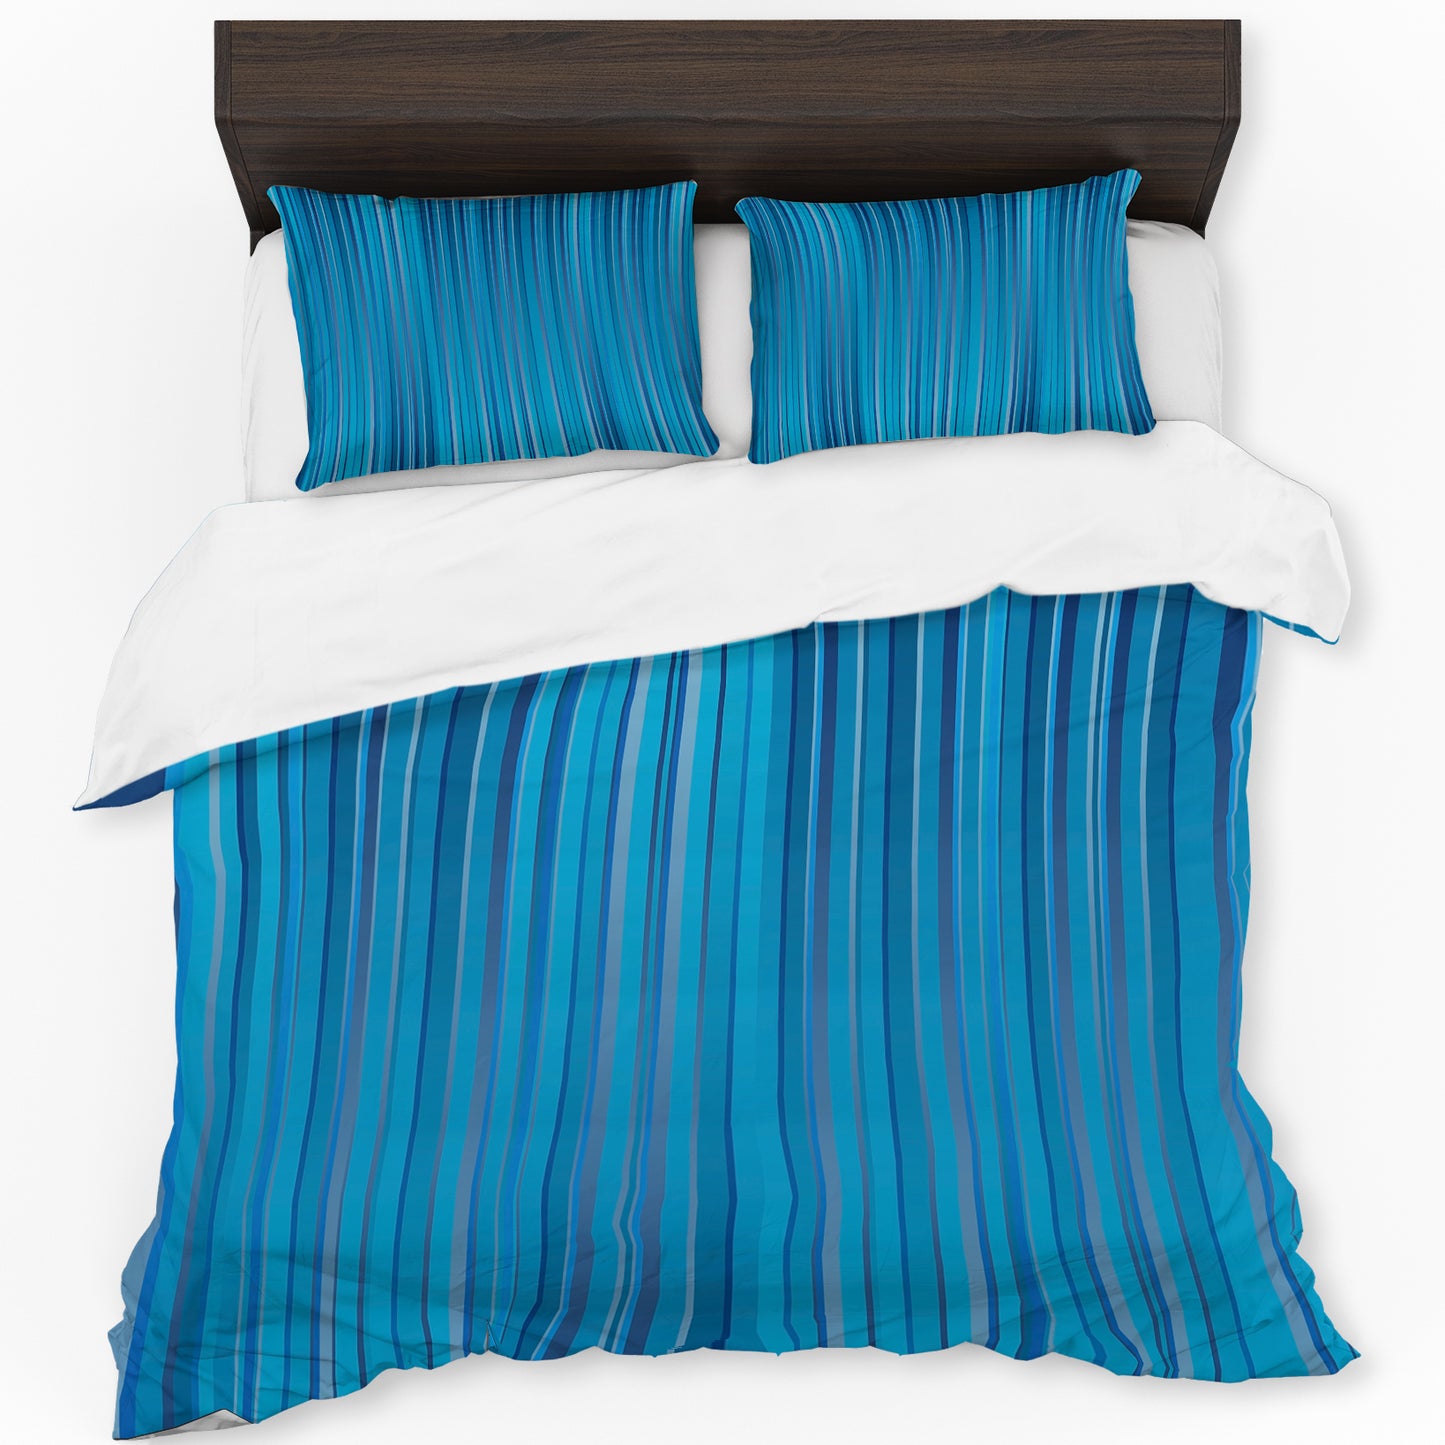 Turquoise Lined Duvet Cover Set